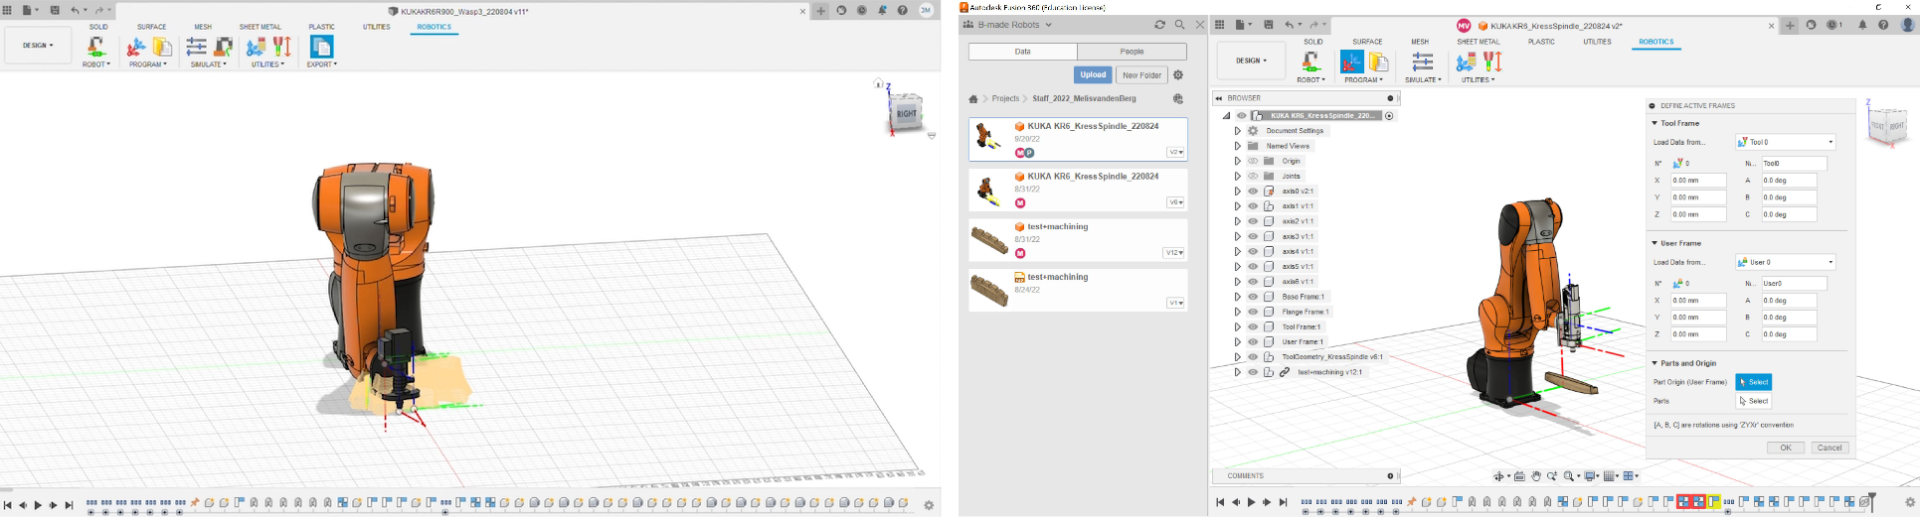 Digital twin created in Fusion 360 for Robotic 3d Printing of Clay (Left) and Robotic Milling of Timber (Right)